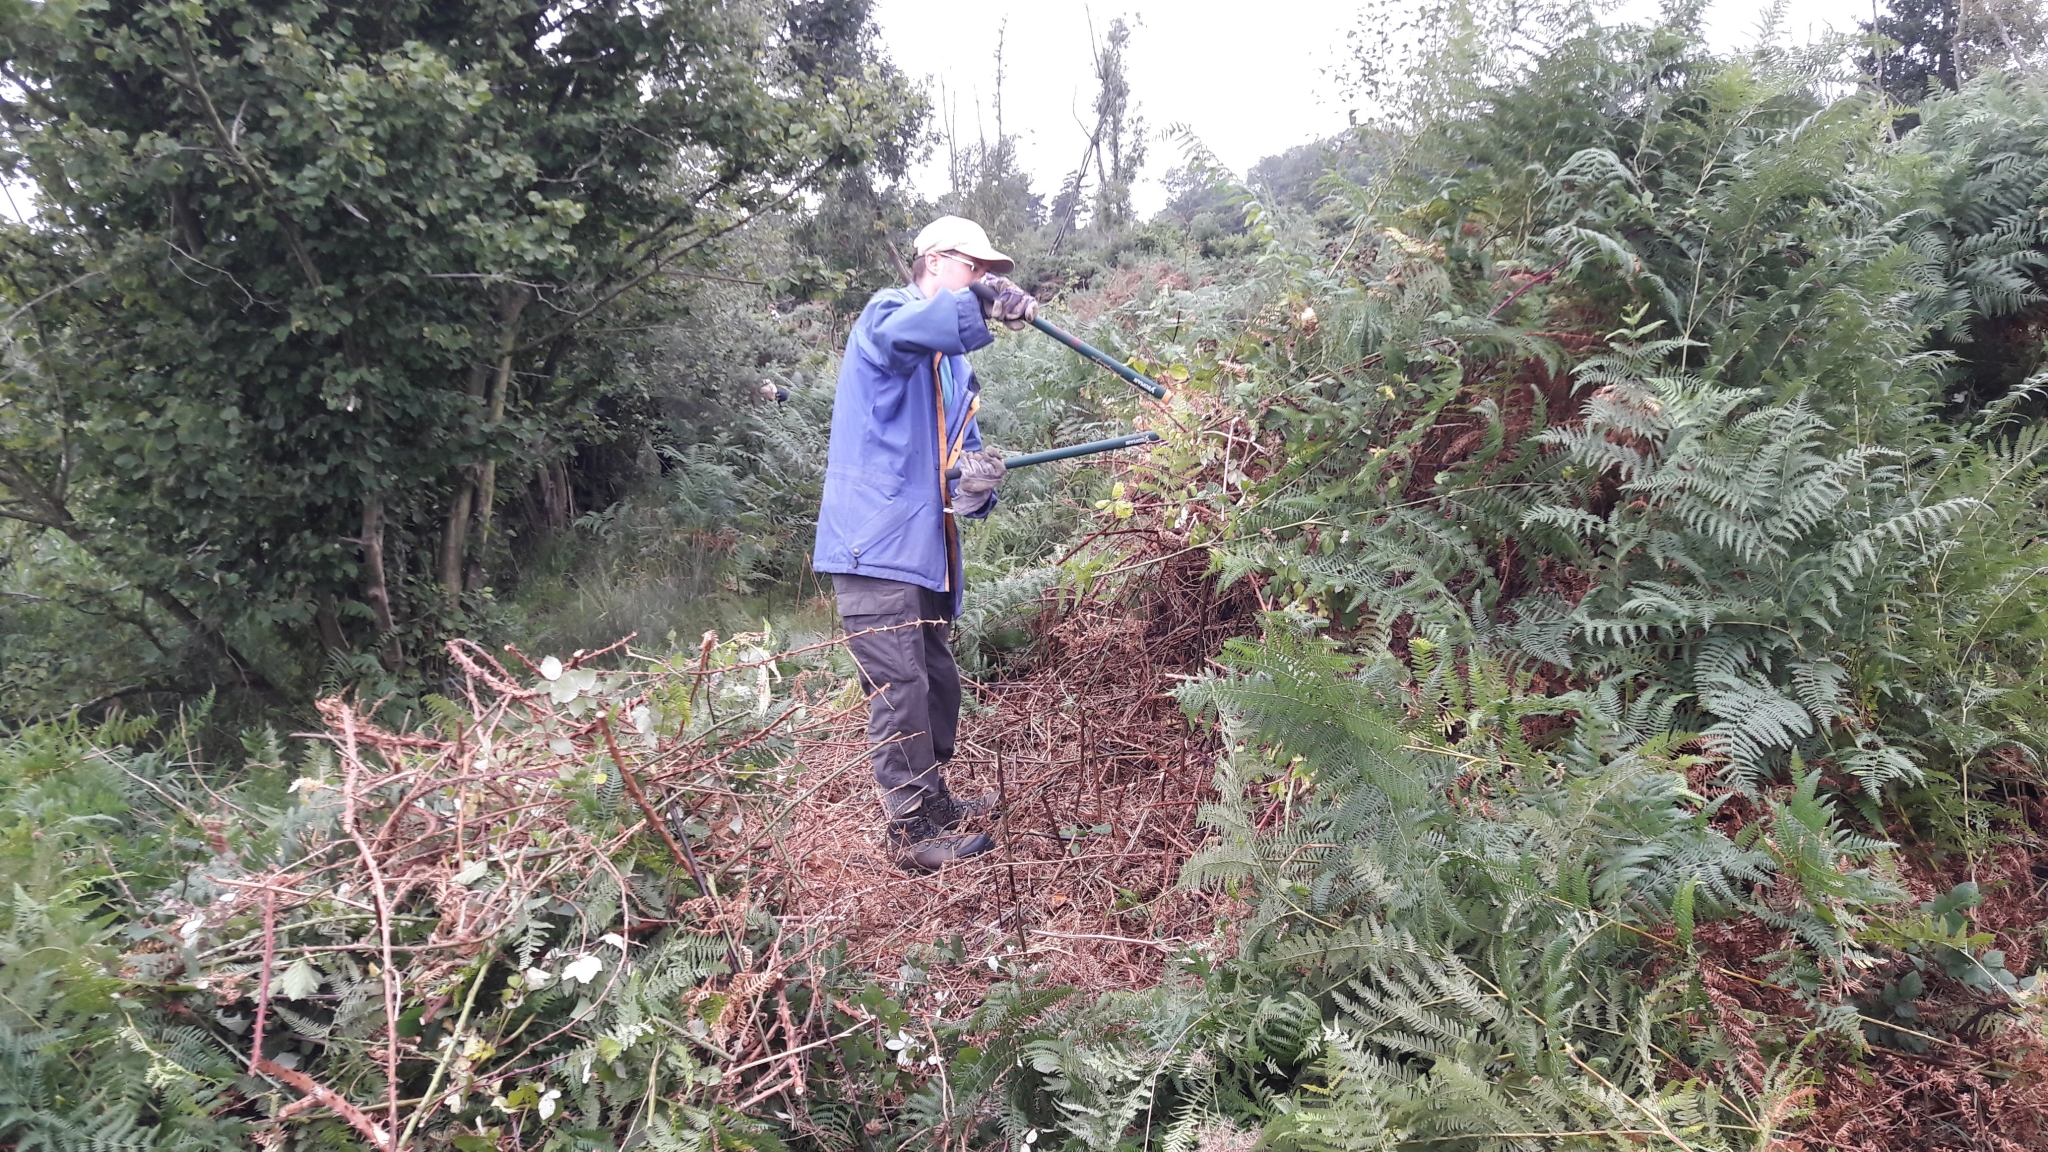 A photo from the FoTF Conservation Event - August 2018 - Gorse Removal at Hockham Hills & Holes : A volunteer used loppers on vegetation